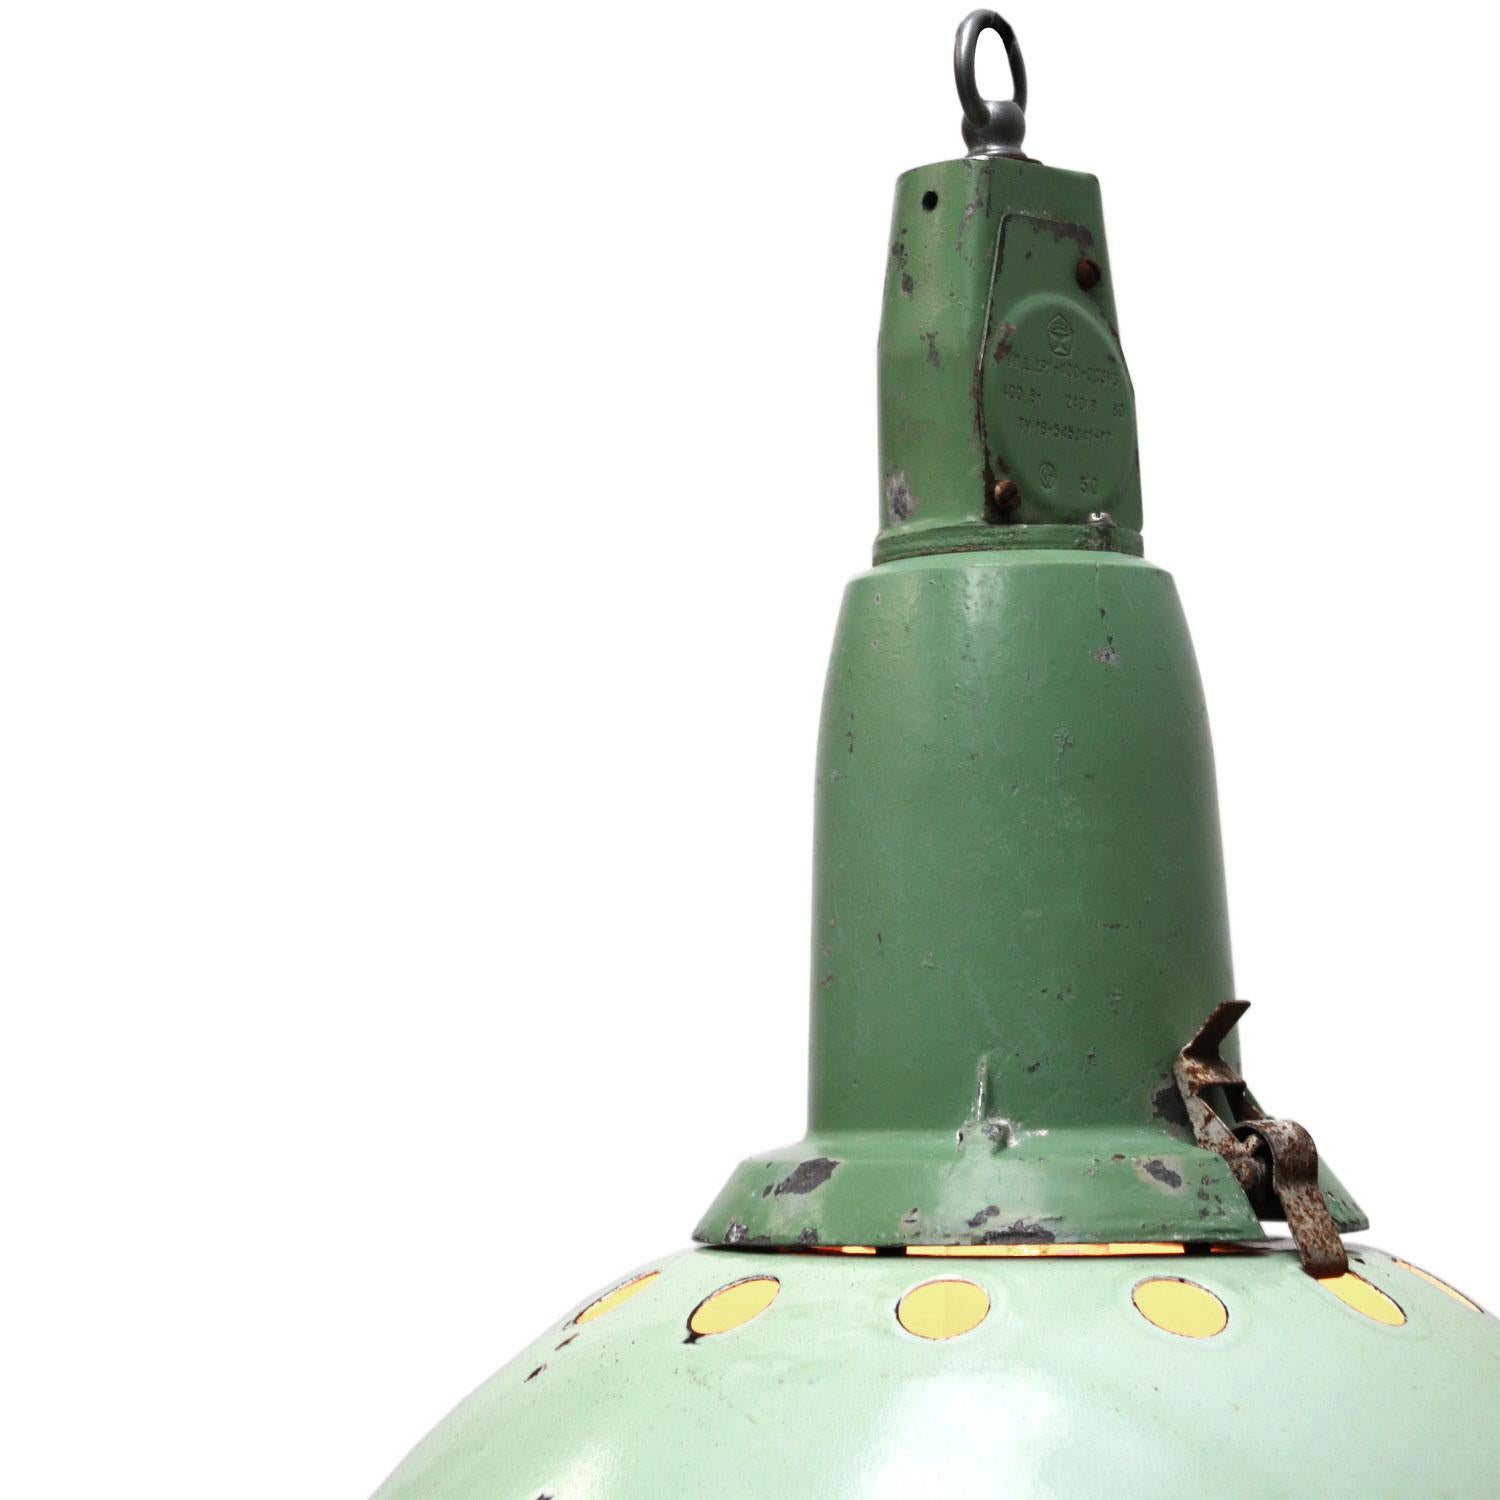 Enamel industrial pendant.
Light green enamel shade, white inside.
Dark green cast aluminium top.

Weight: 4.0 kg / 8.8 lb

All lamps have been made suitable by international standards for incandescent light bulbs, energy-efficient and LED